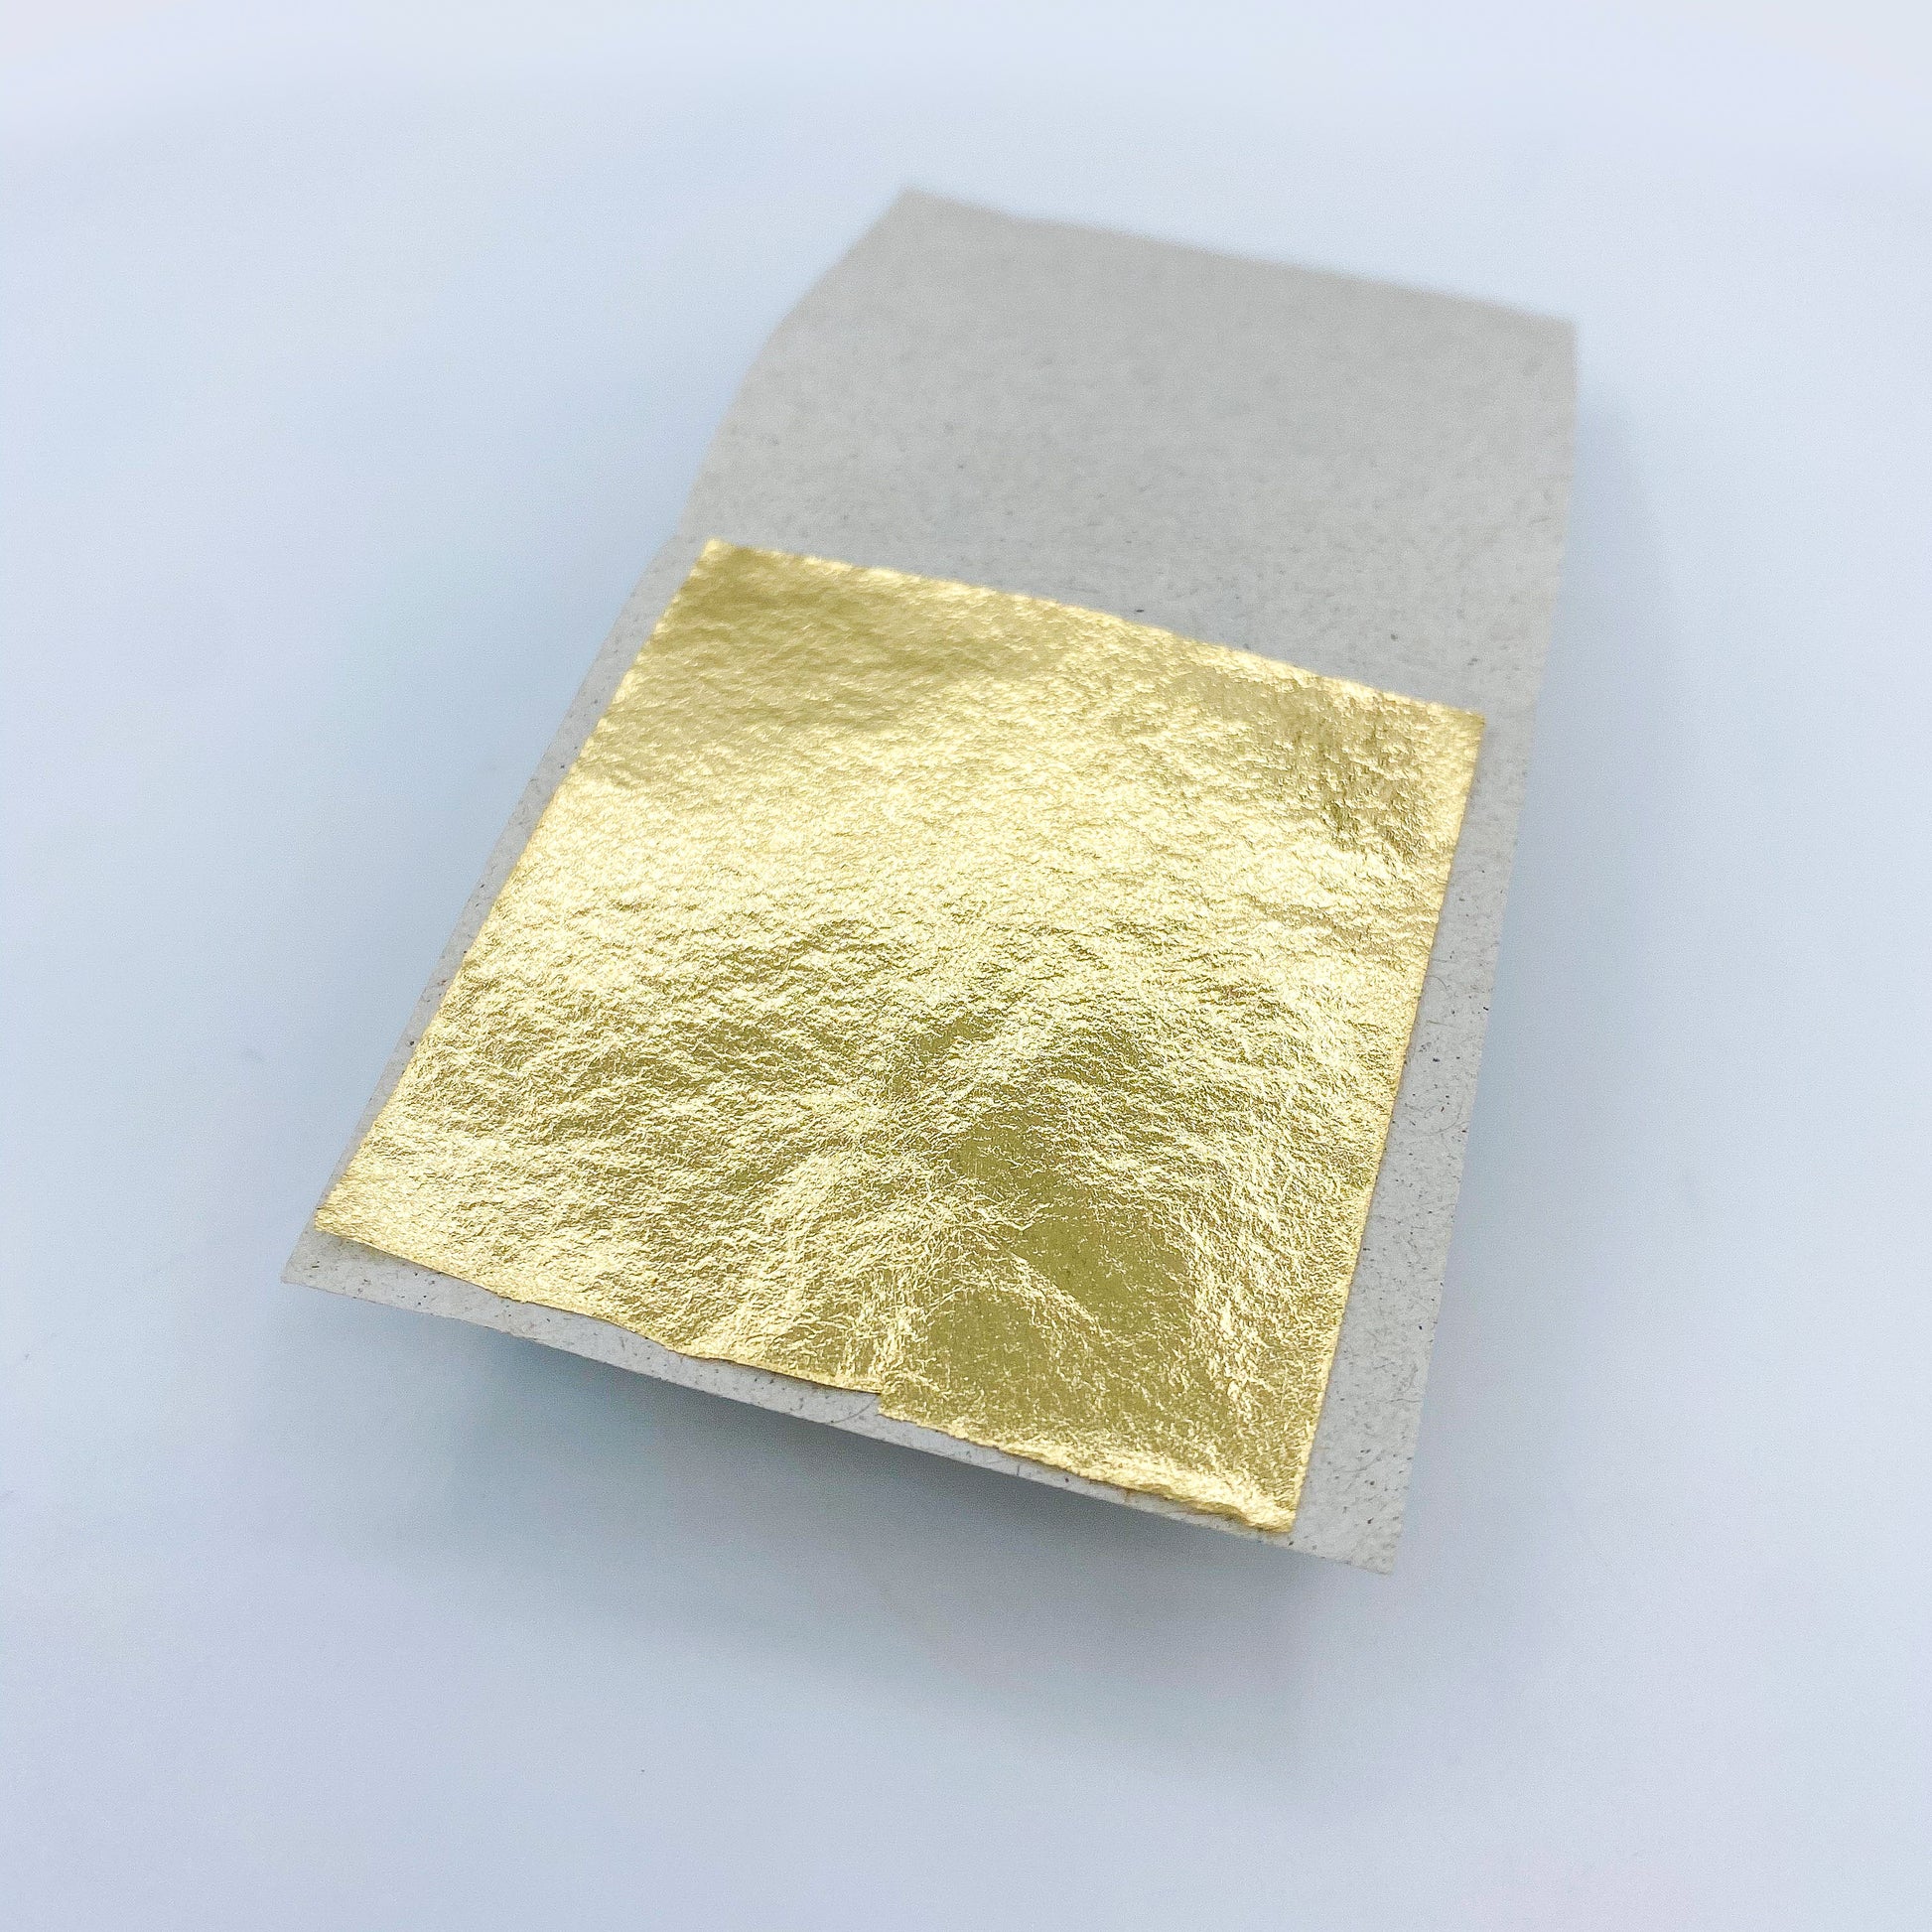 Gold Flakes, Pure Gold Wholesale, Gold Leaf